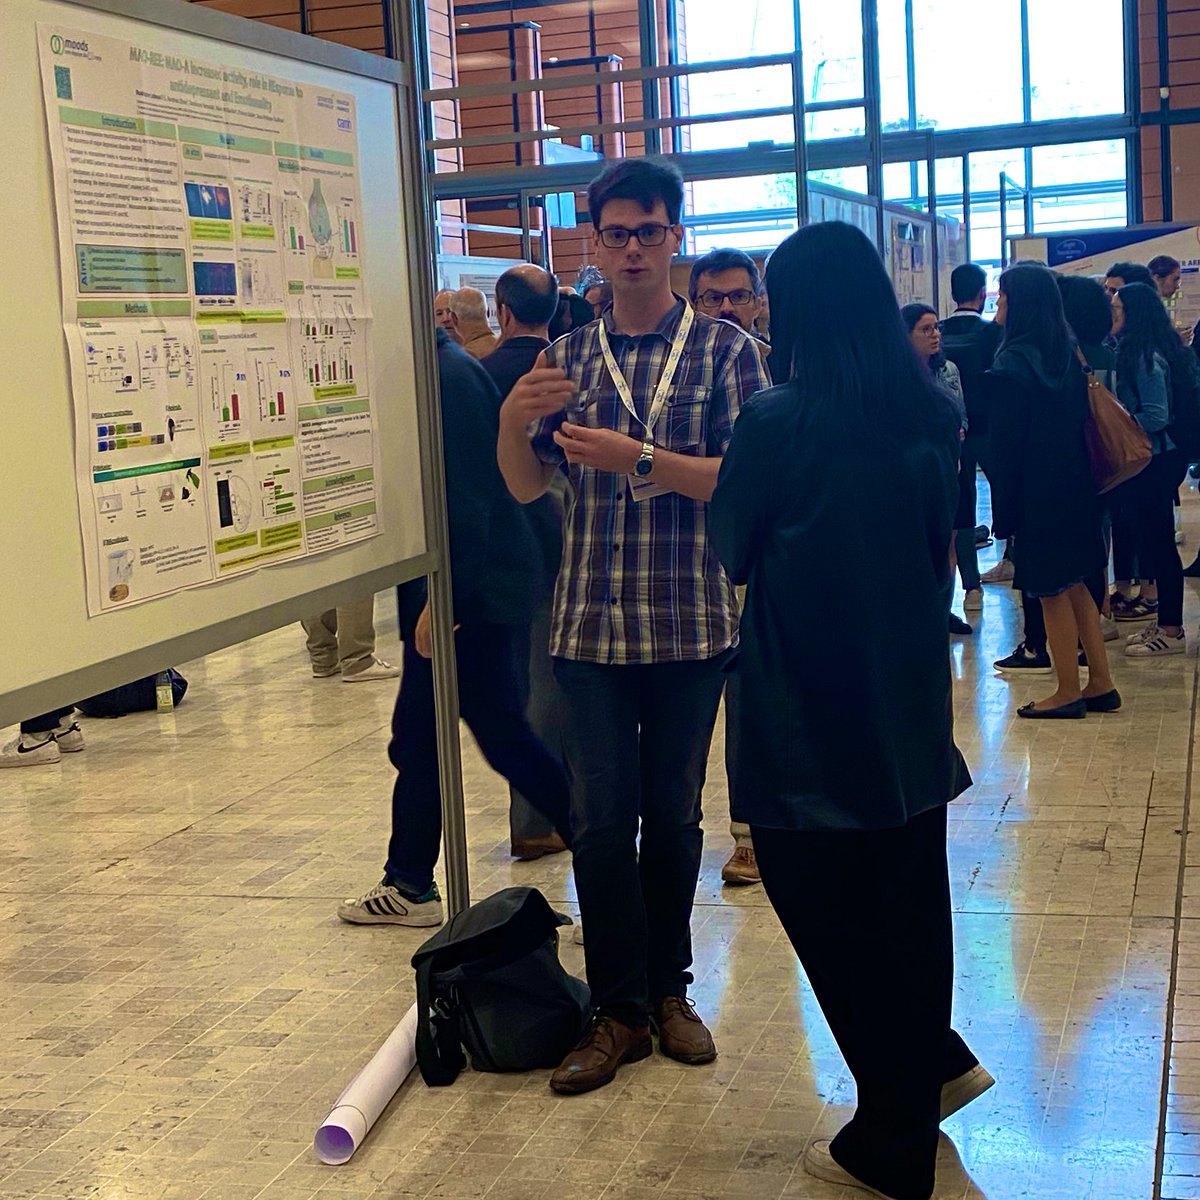 Rodolphe Lebeau, PhD student in @MOODS_Inserm @Cesp_Inserm @UnivParisSaclay @Pharma_UPSaclay presents his work in collaboration with #NDA_sibillelab @CAMHResearch on increased MAOA activity on neurochemistry and emotionality at #NeuroFrance2023 @SocNeuro_Tweets